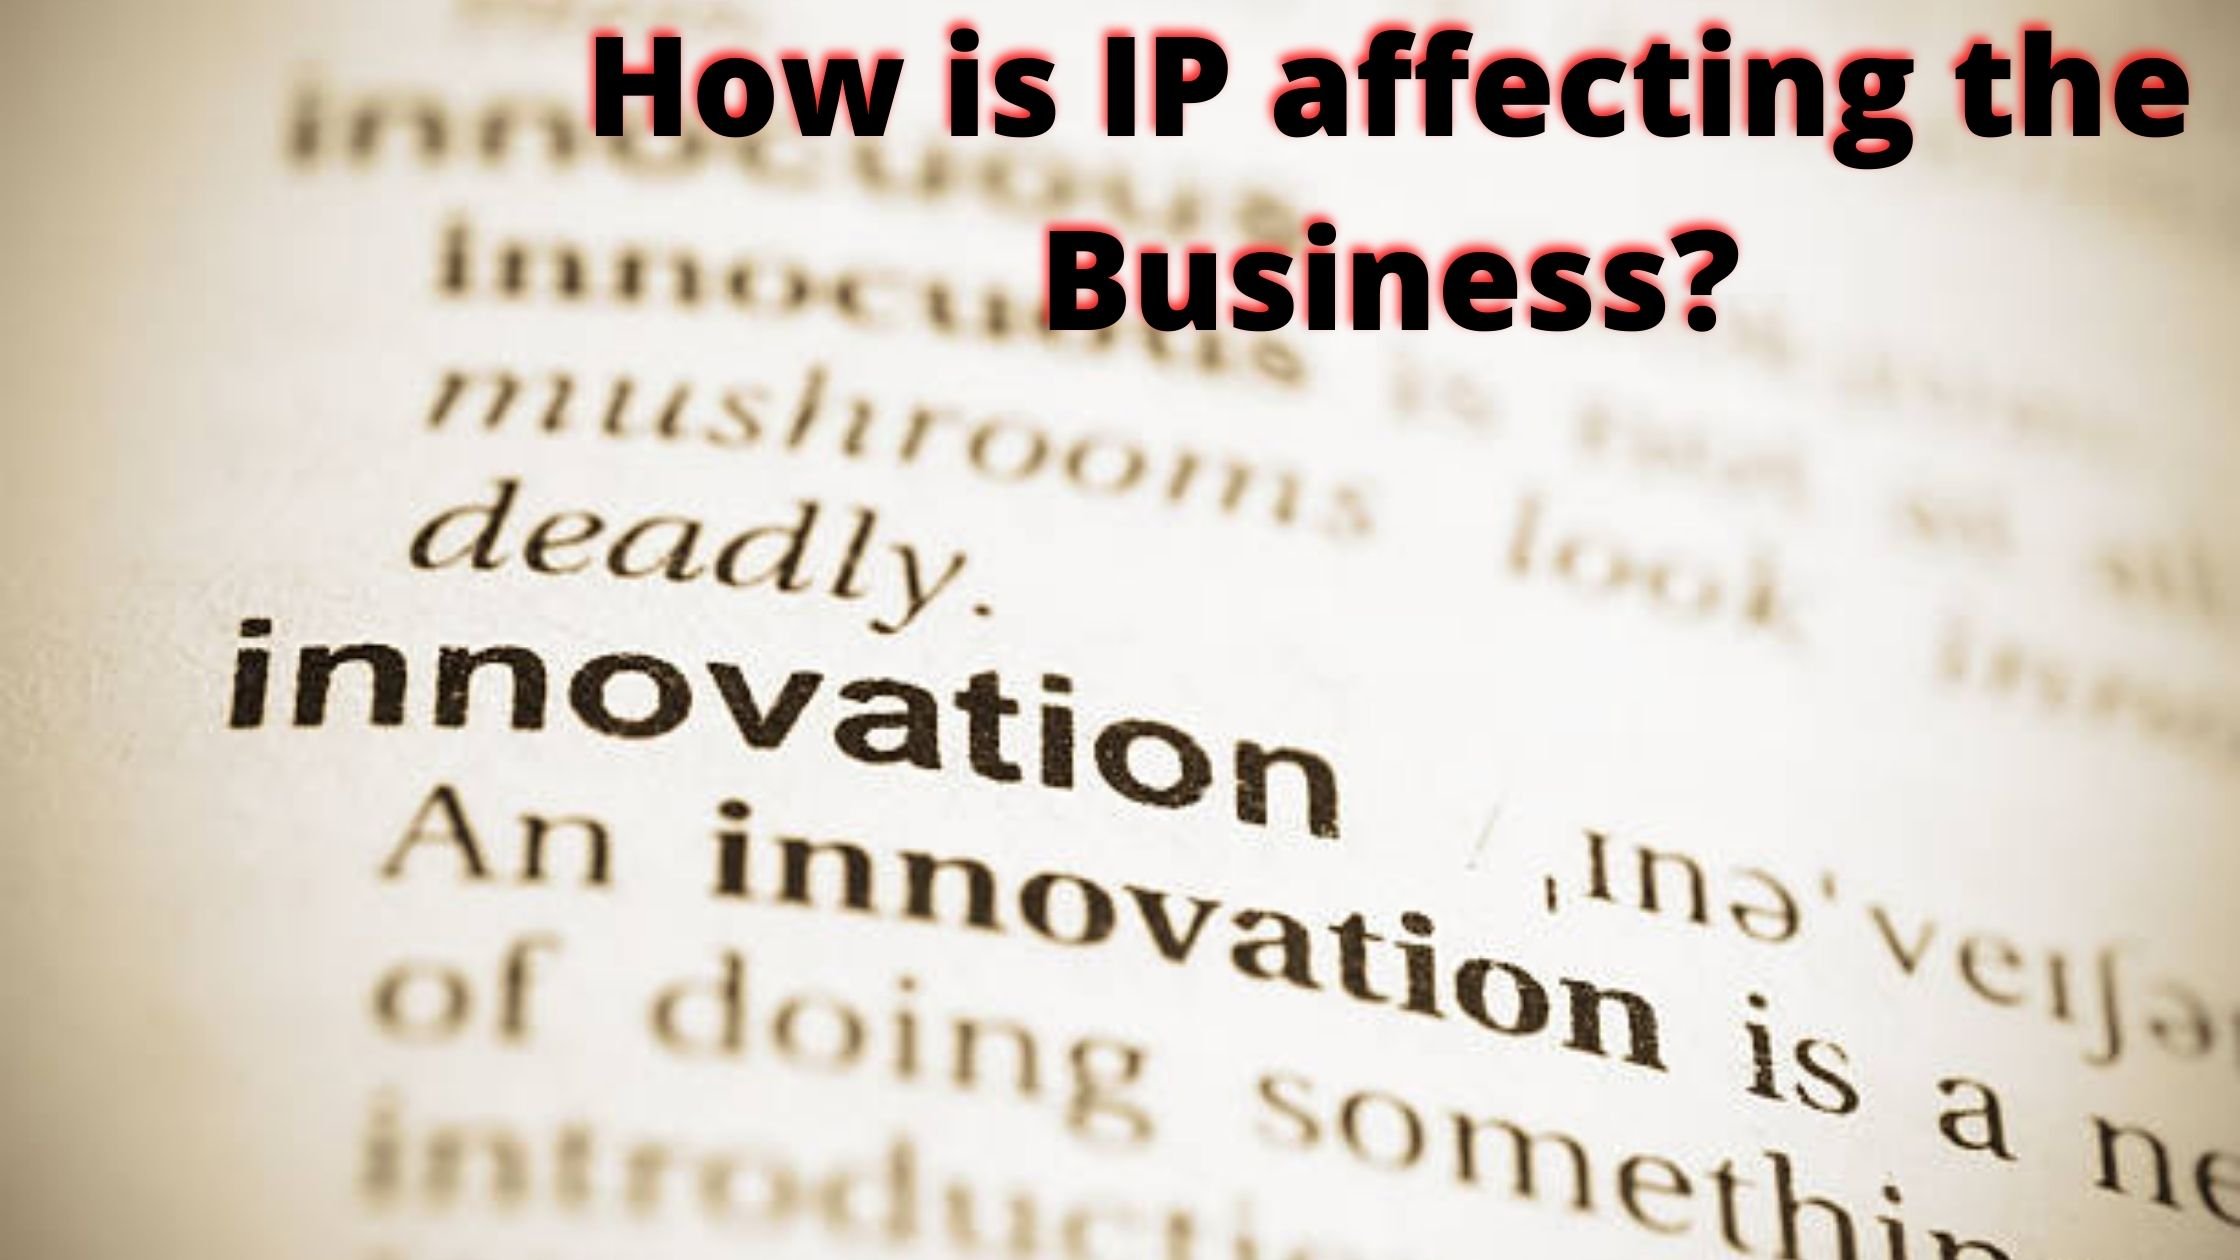 How is IP affecting the Business?